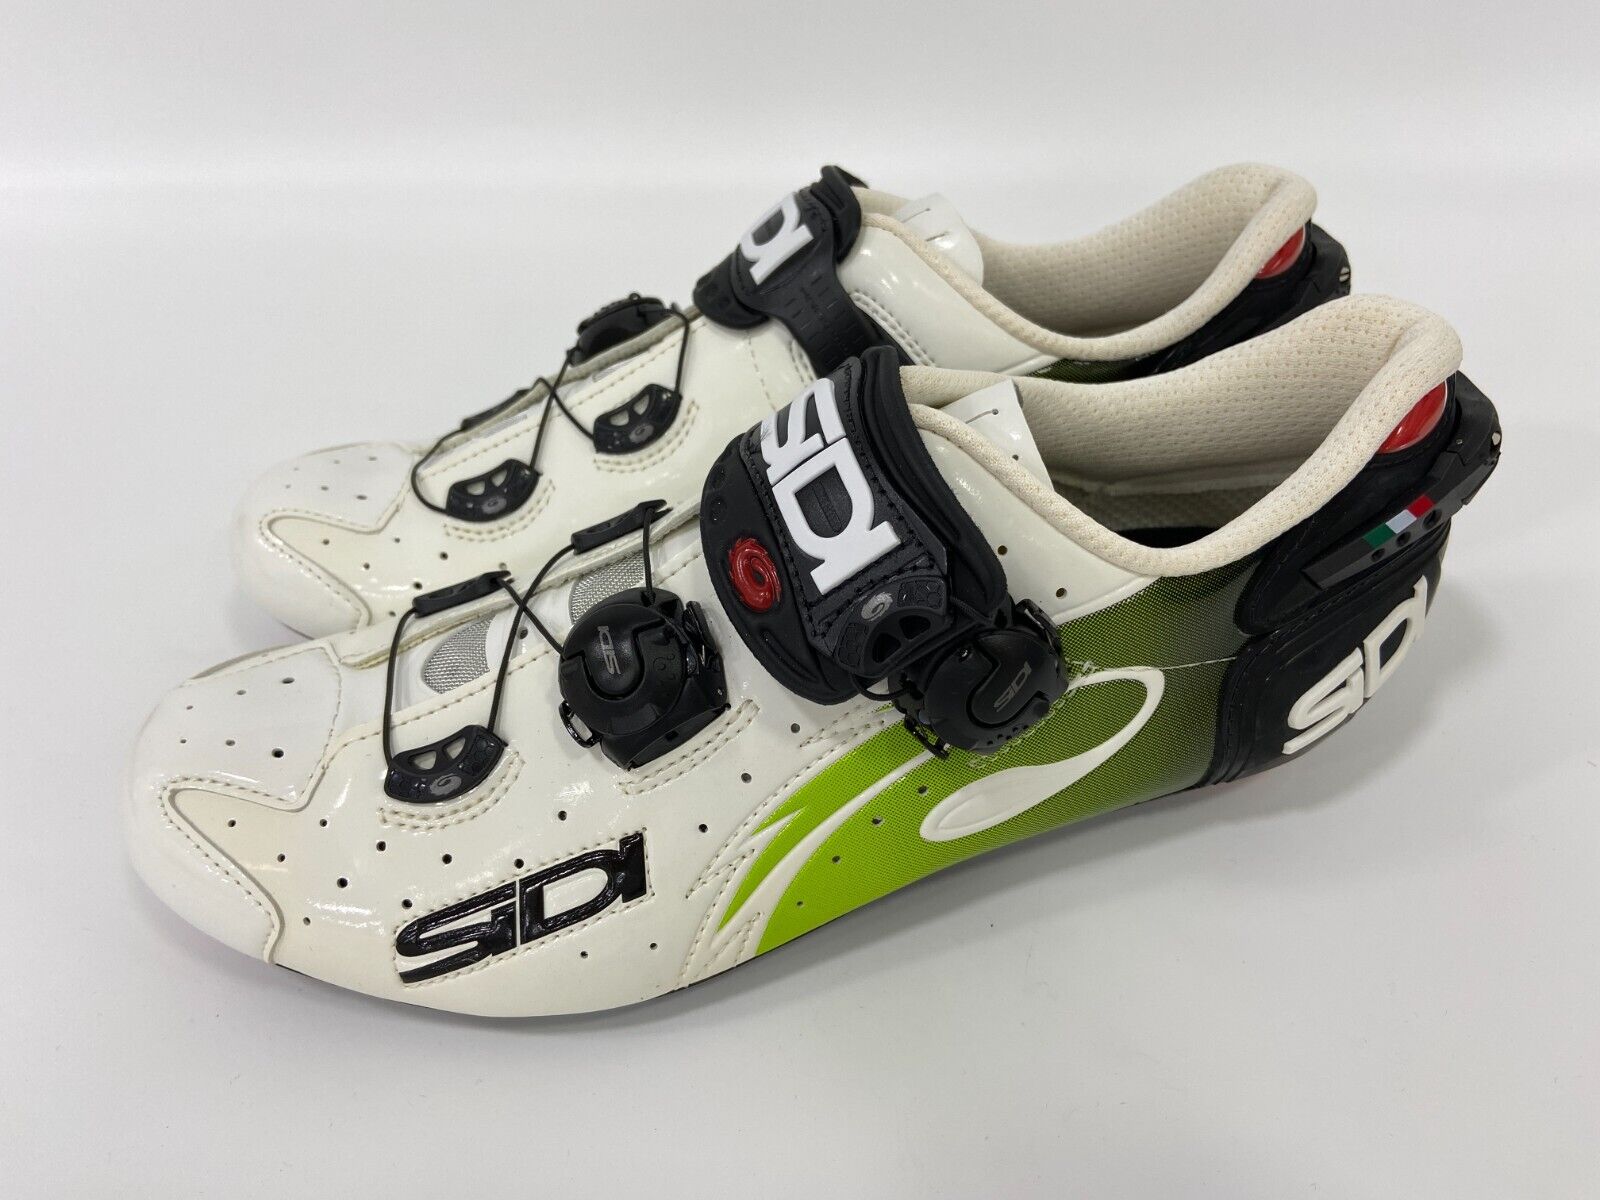 Sidi WIRE Carbon Road Cycling Shoes Size EU42 (Cannondale)